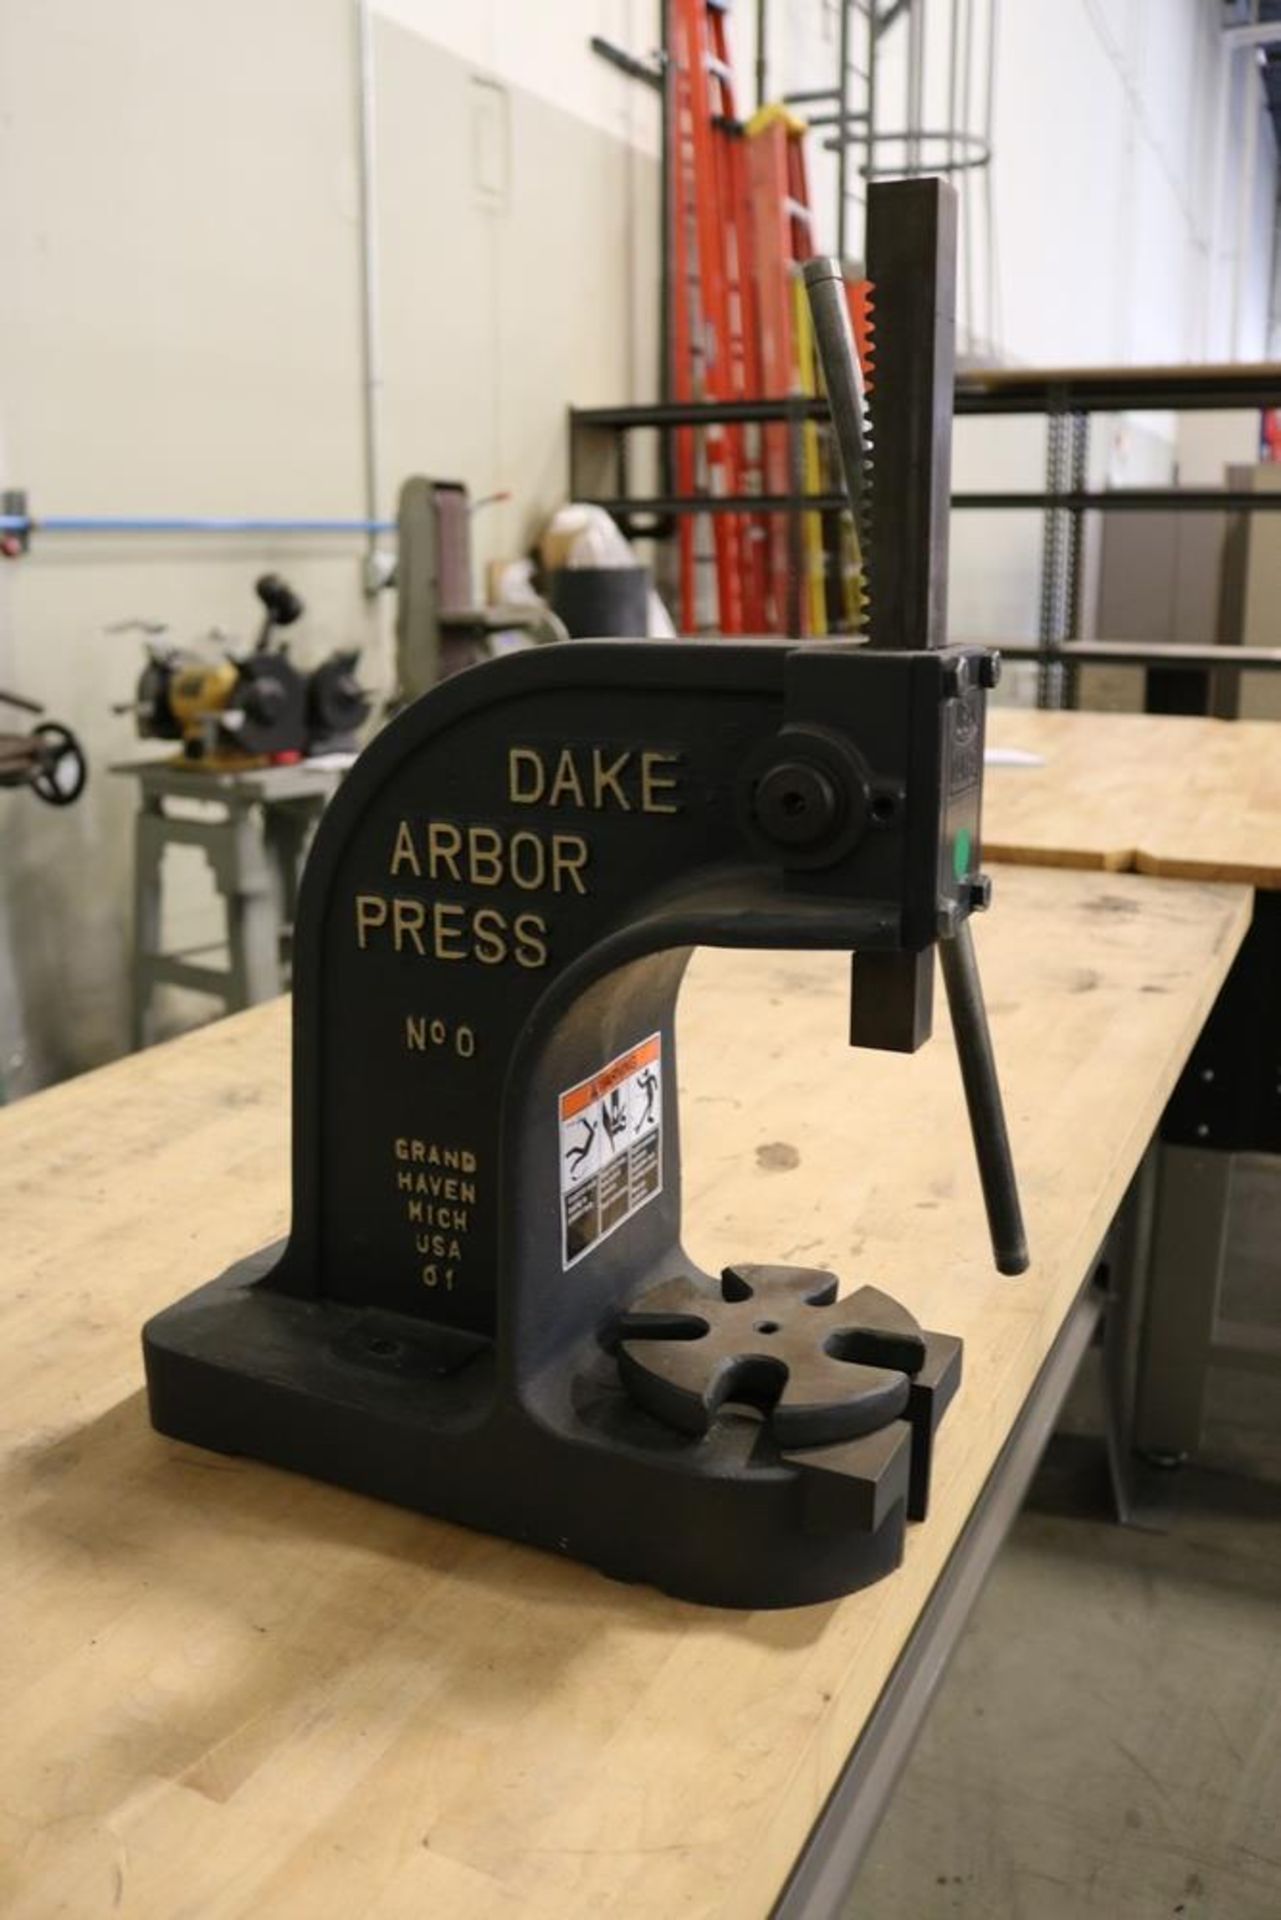 Wilton 8" Jaw Table Vice & Drake Abror Press No 0 With Wood Top Work Table 6' x 30" x 33 1/2" - Image 2 of 5